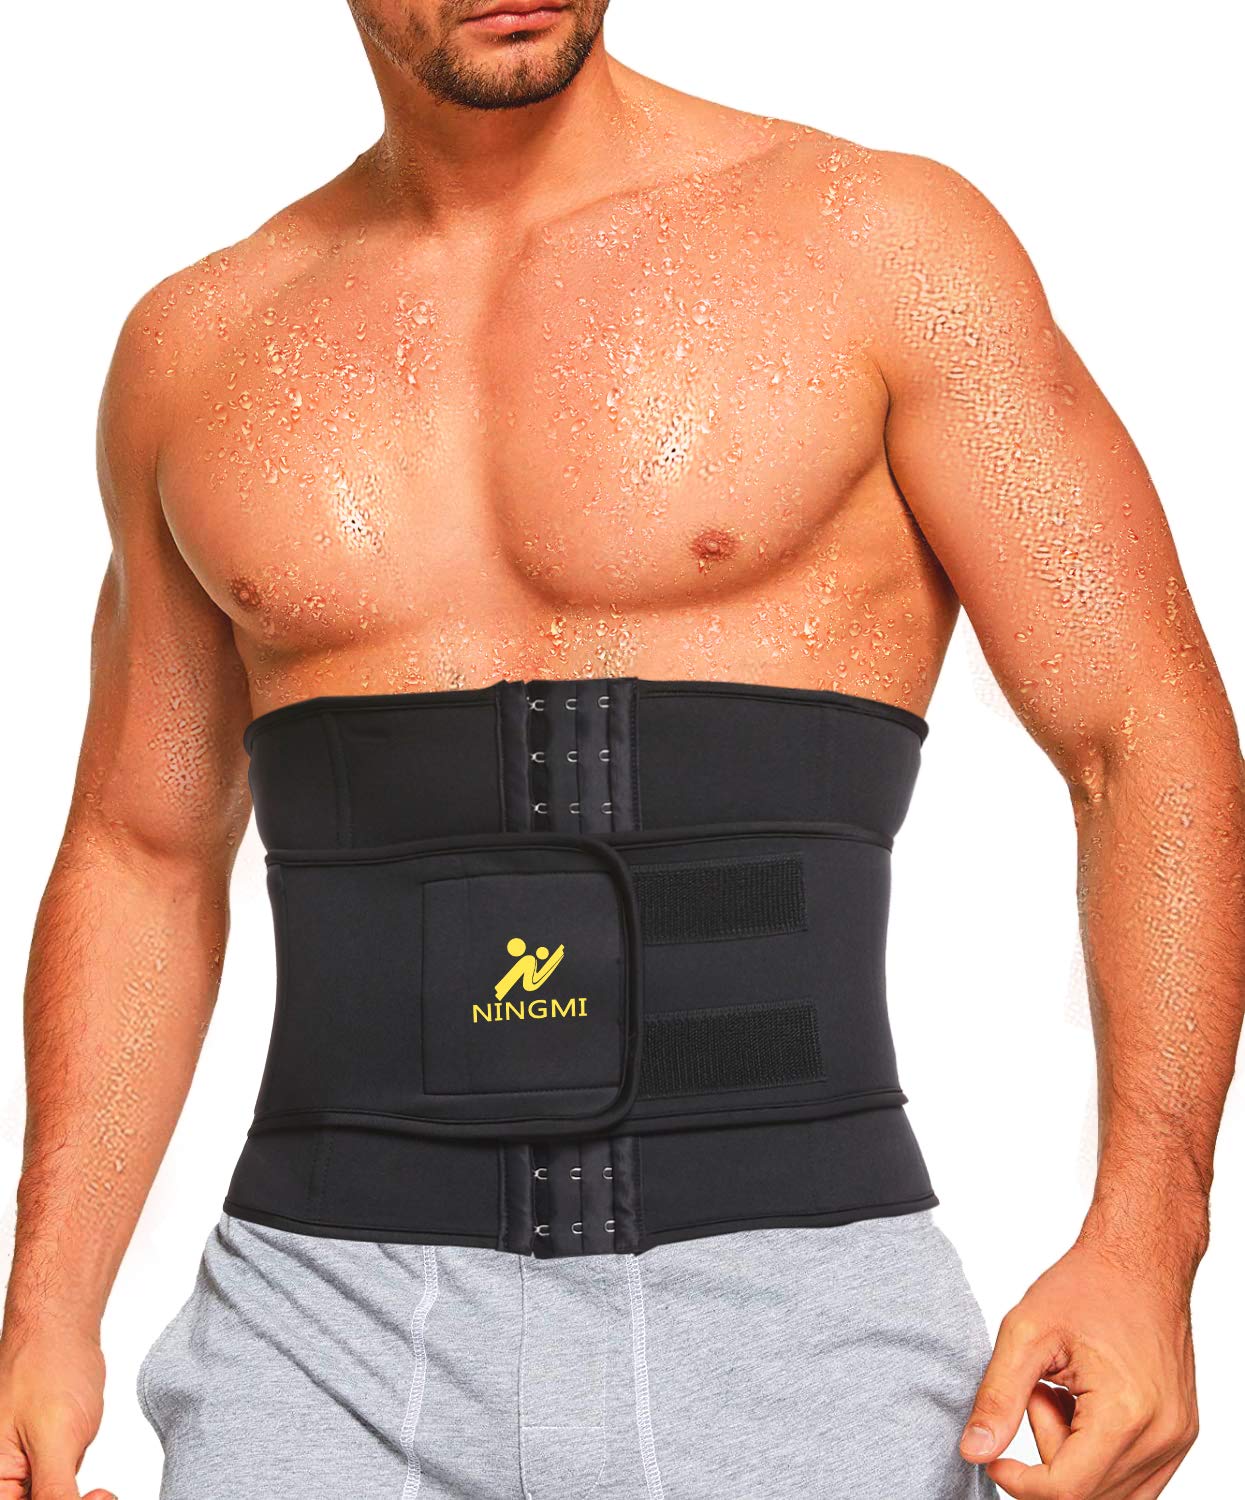 NINGMI Waist Trainer for Men Sweat Belt - Sauna Trimmer Stomach Wraps  Workout Band Male Waste Trainers